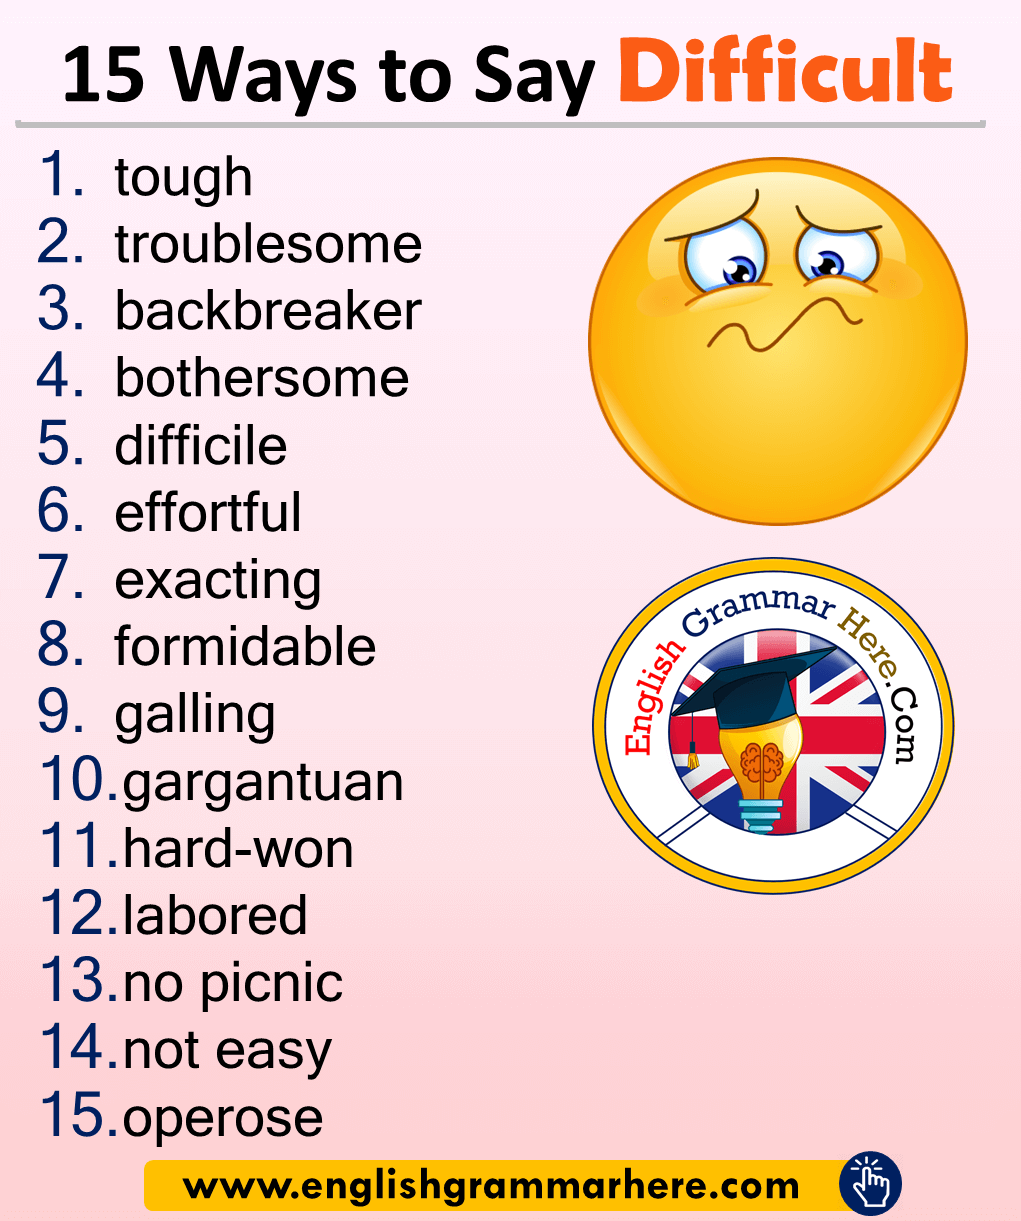 Different ways to say Difficult in english, 15 Ways to Say DIFFICULT in English